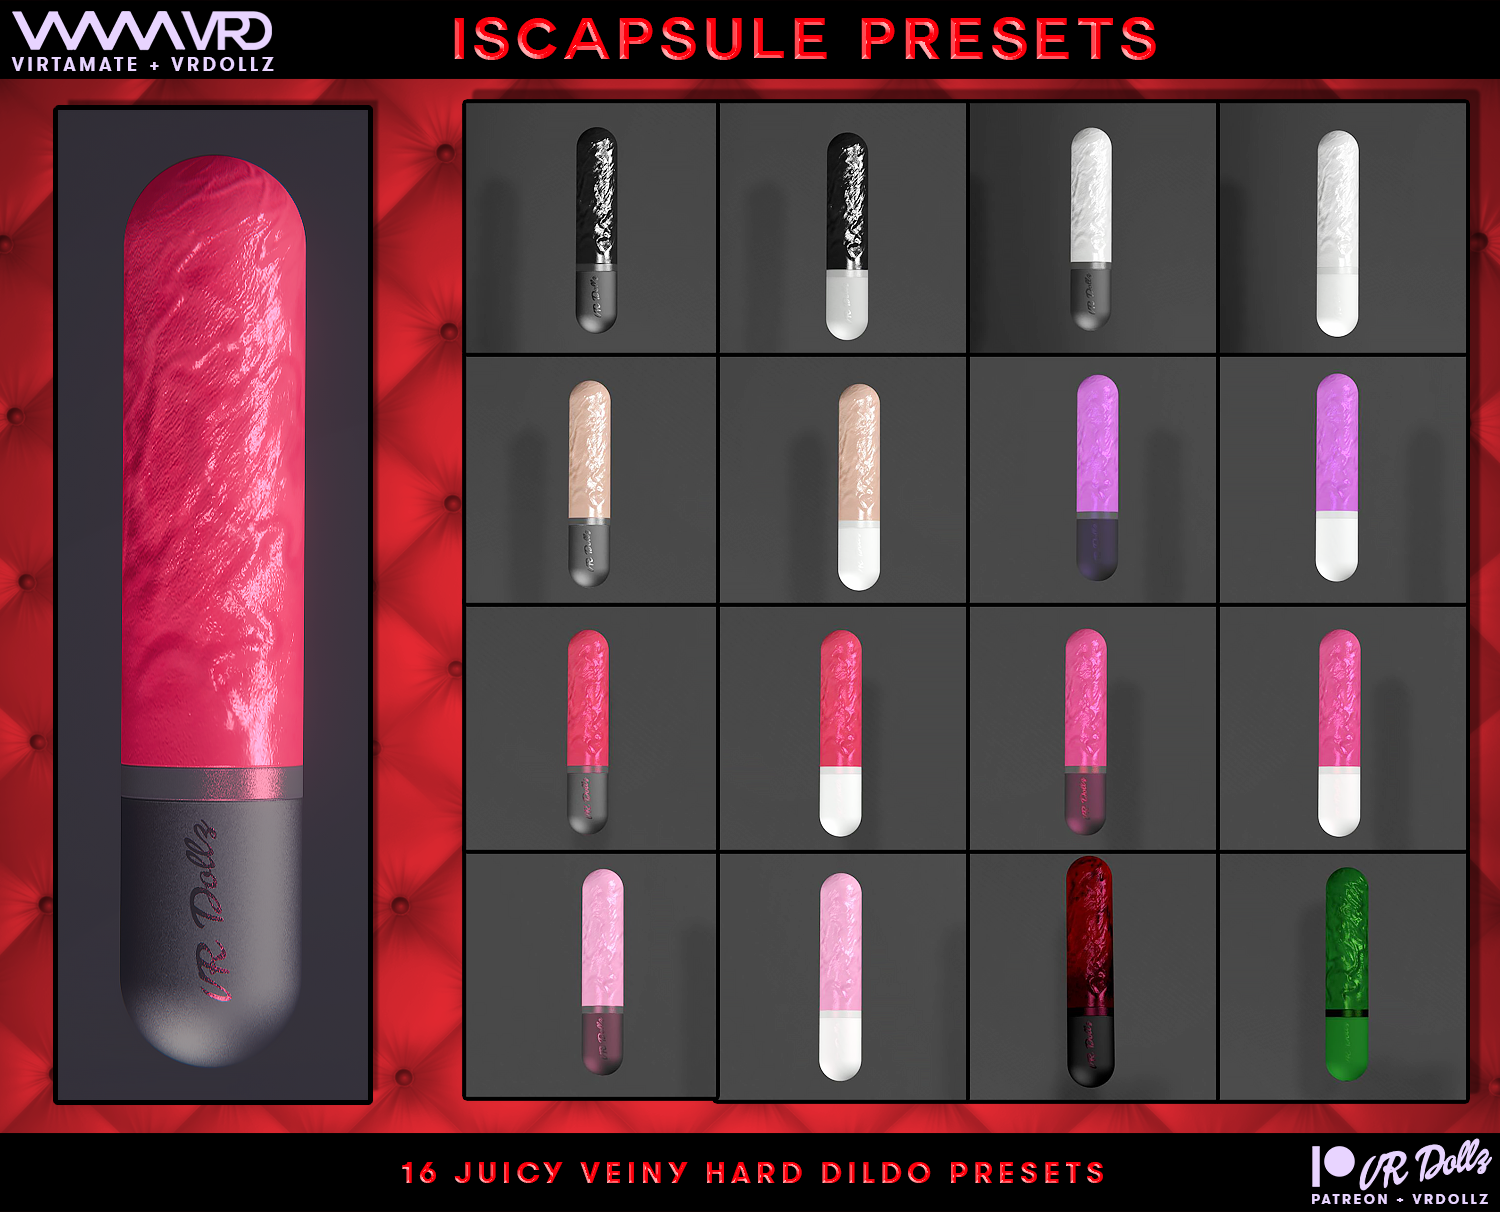 iscapsule presets.png